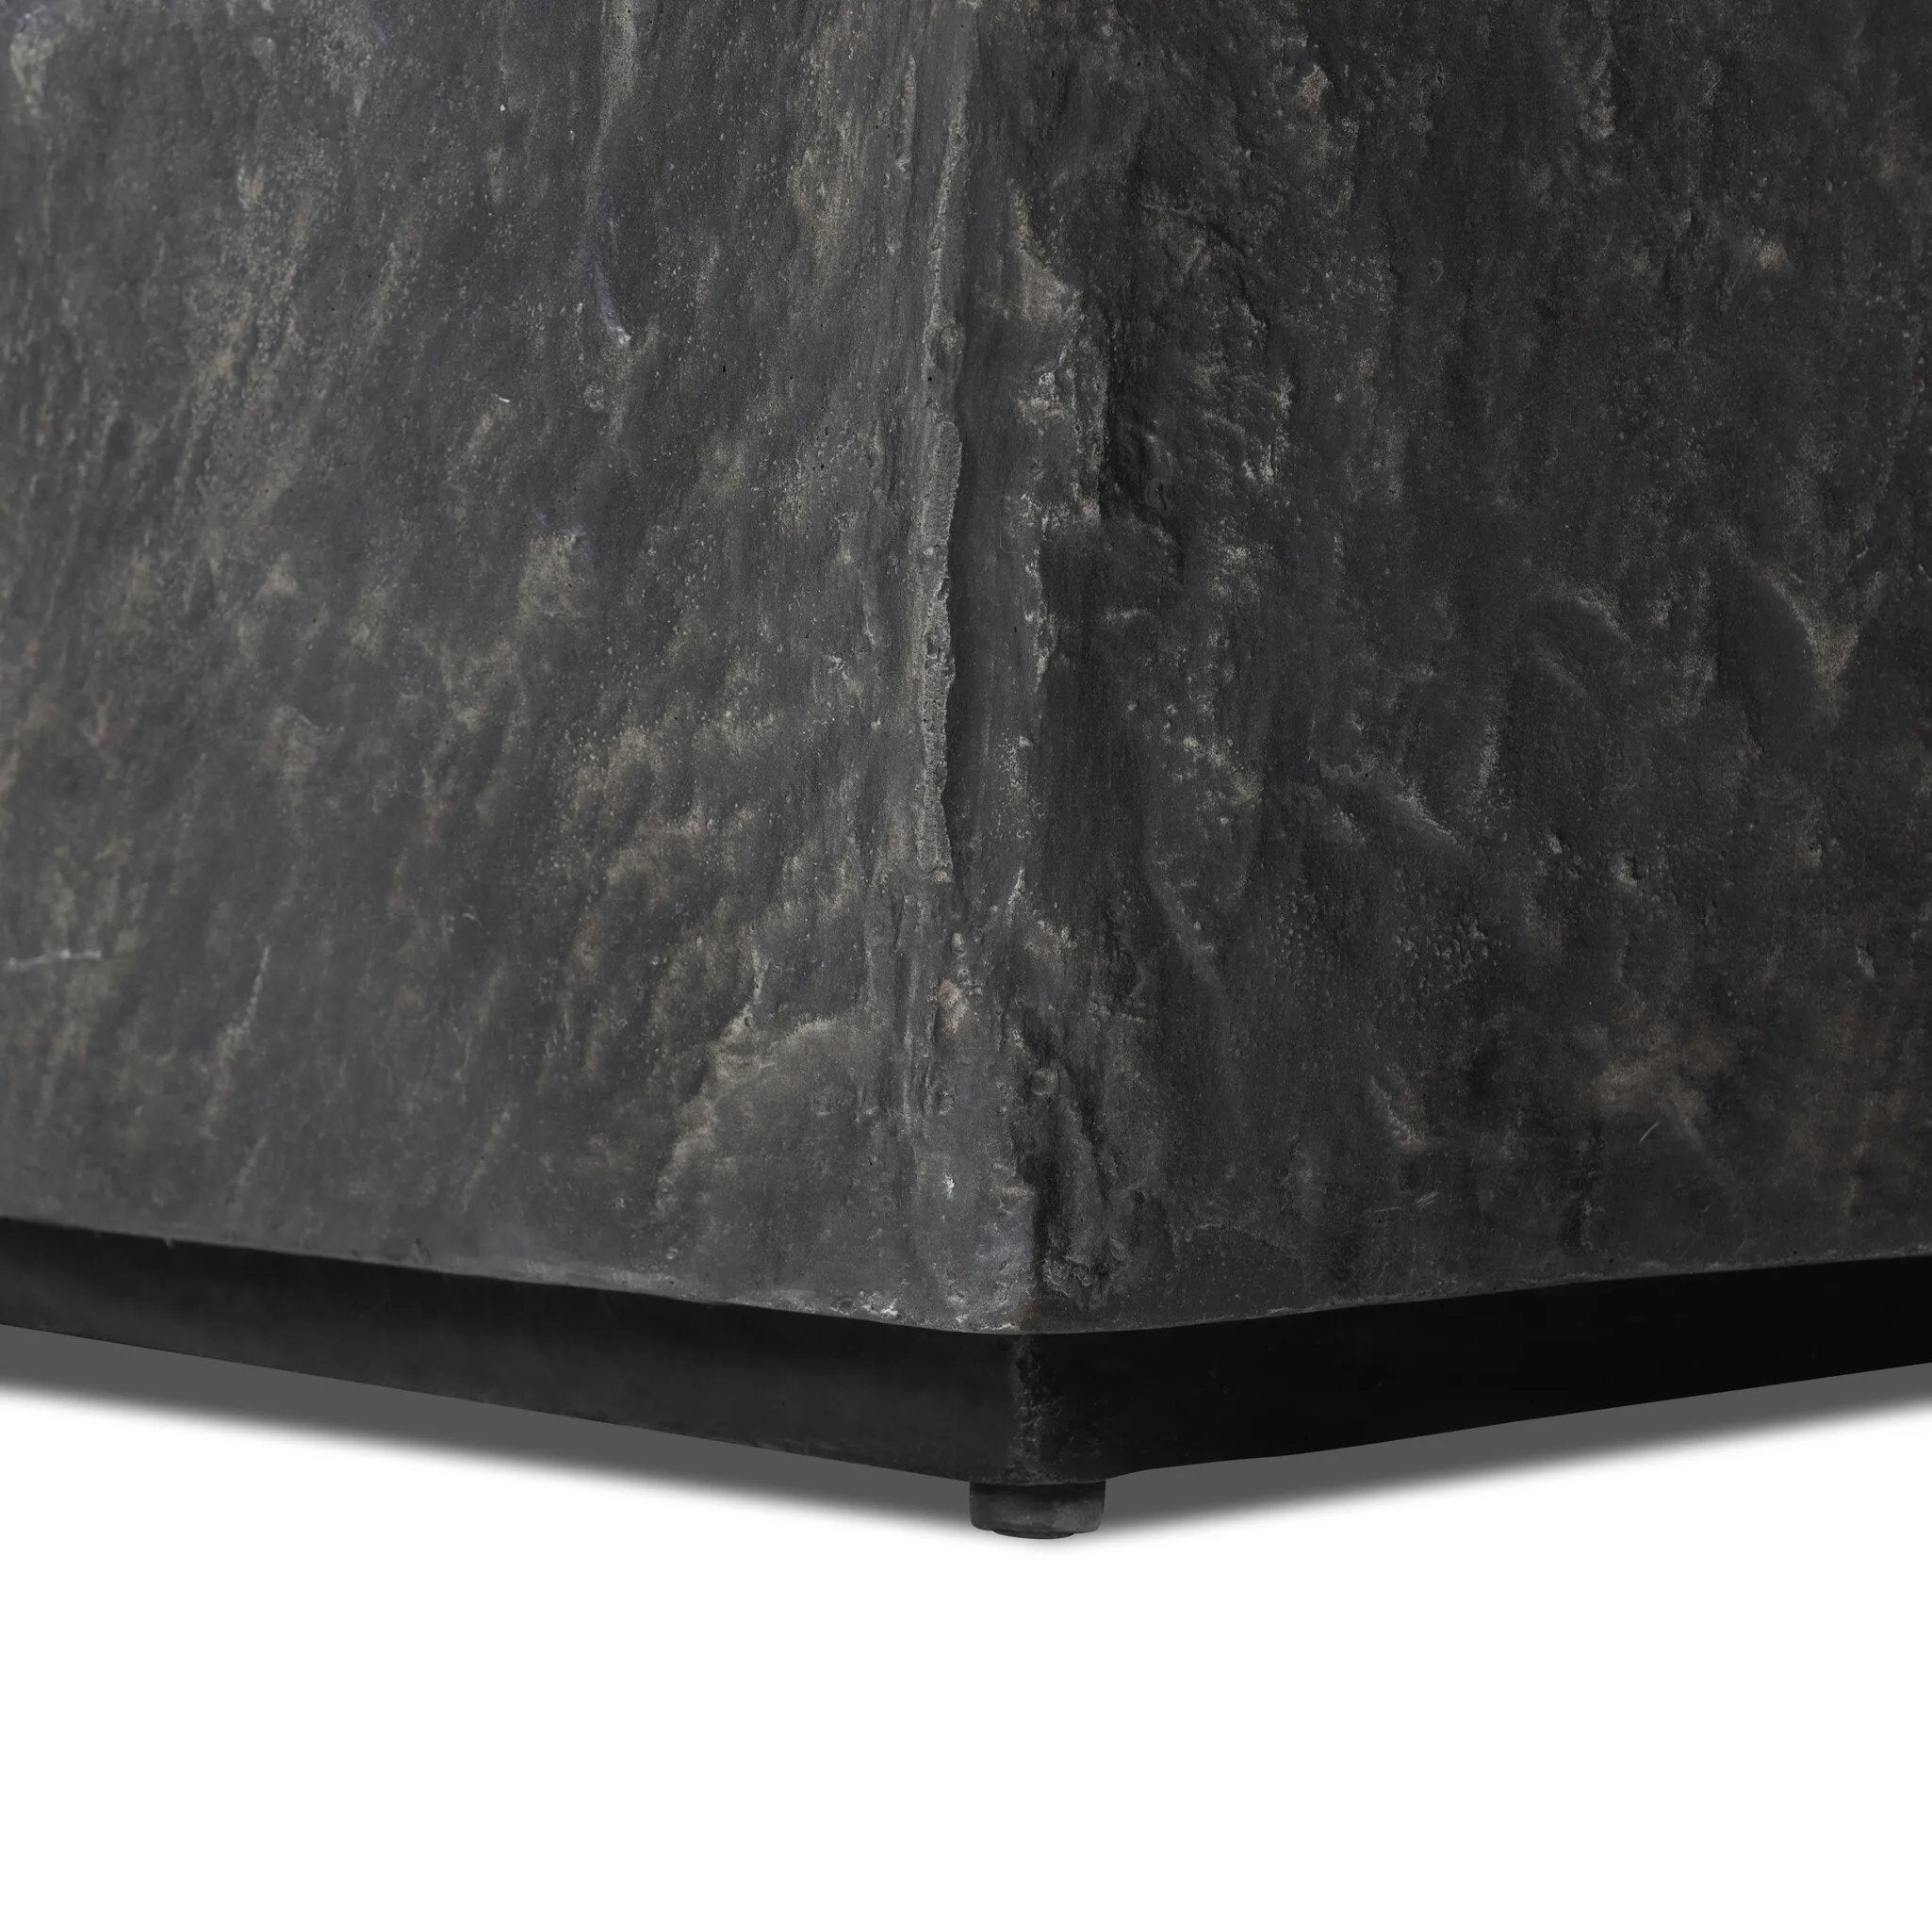 Cast black concrete features heavily textured sides that resemble natural slate, paired with a smoothed tabletop.Collection: Chandle Amethyst Home provides interior design, new home construction design consulting, vintage area rugs, and lighting in the San Diego metro area.